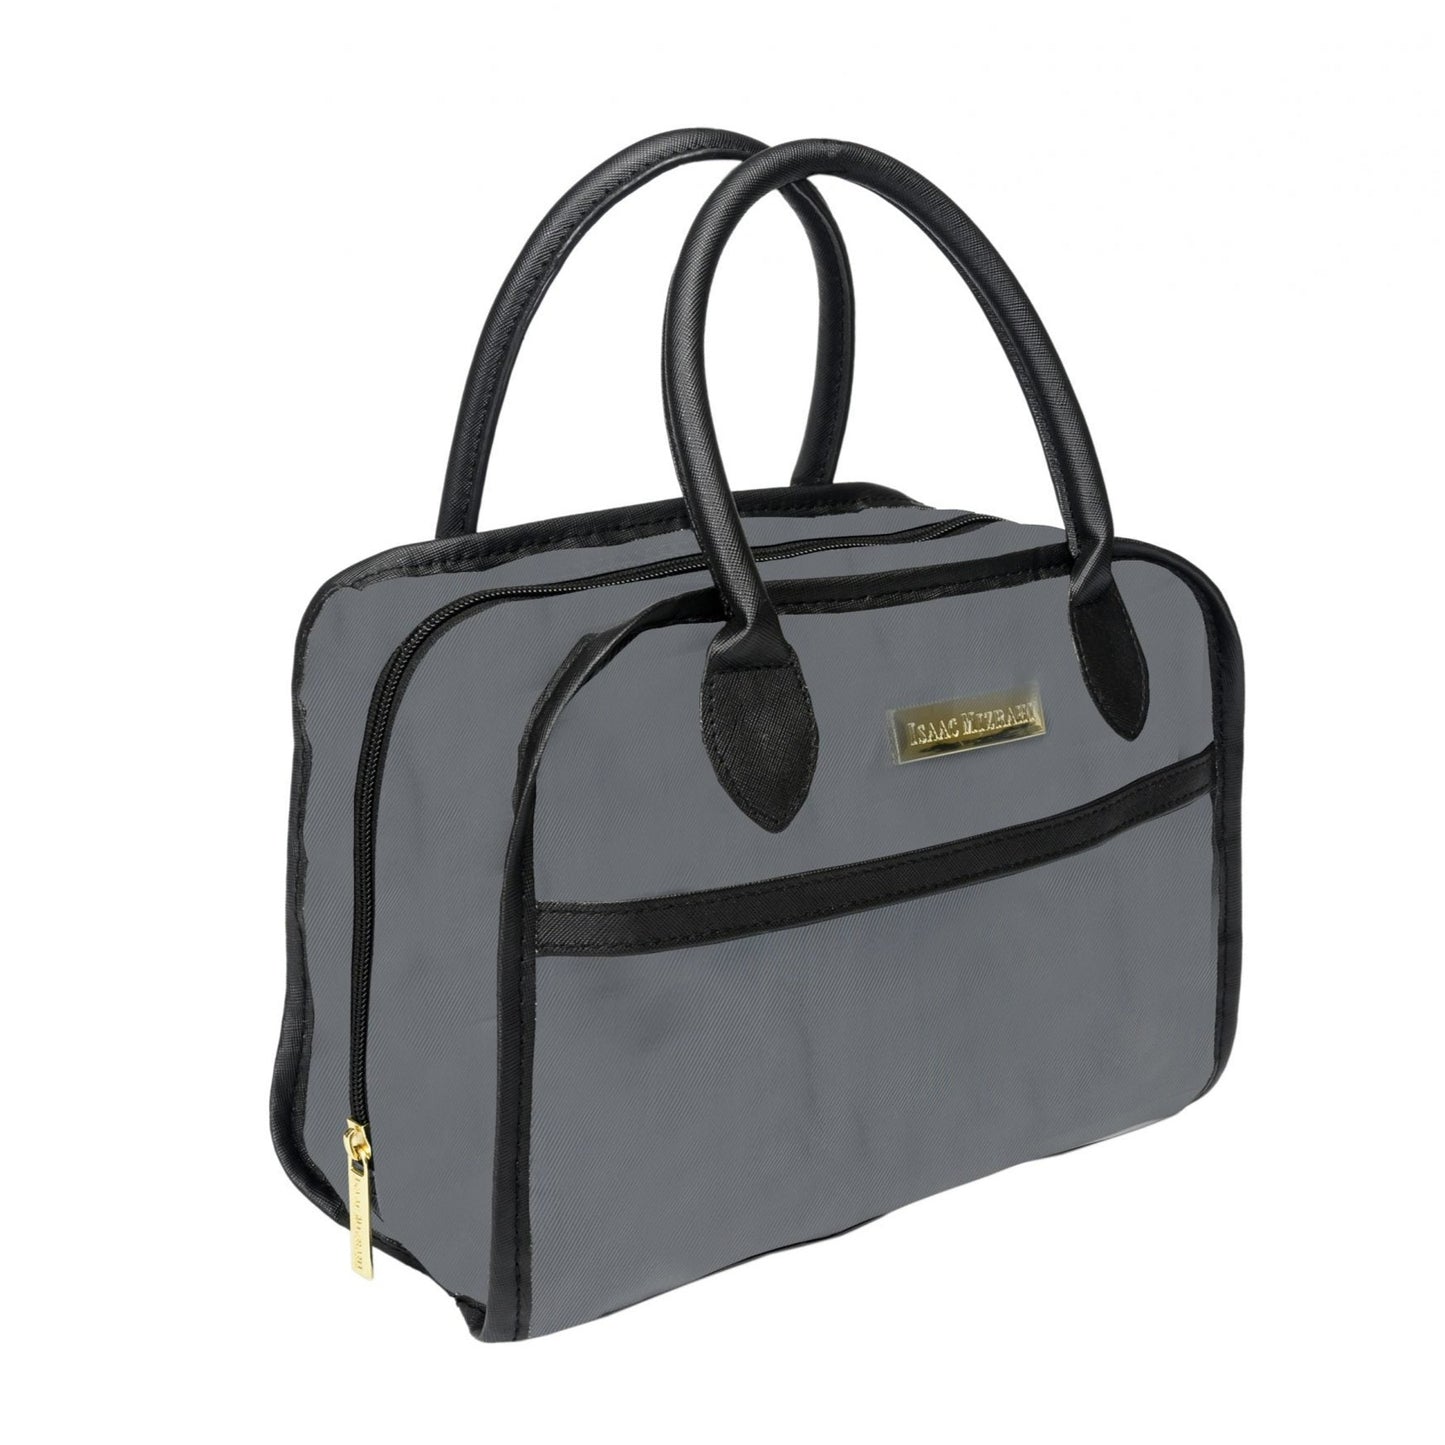 Isaac Mizrahi Vesey Boxy Lunch Tote